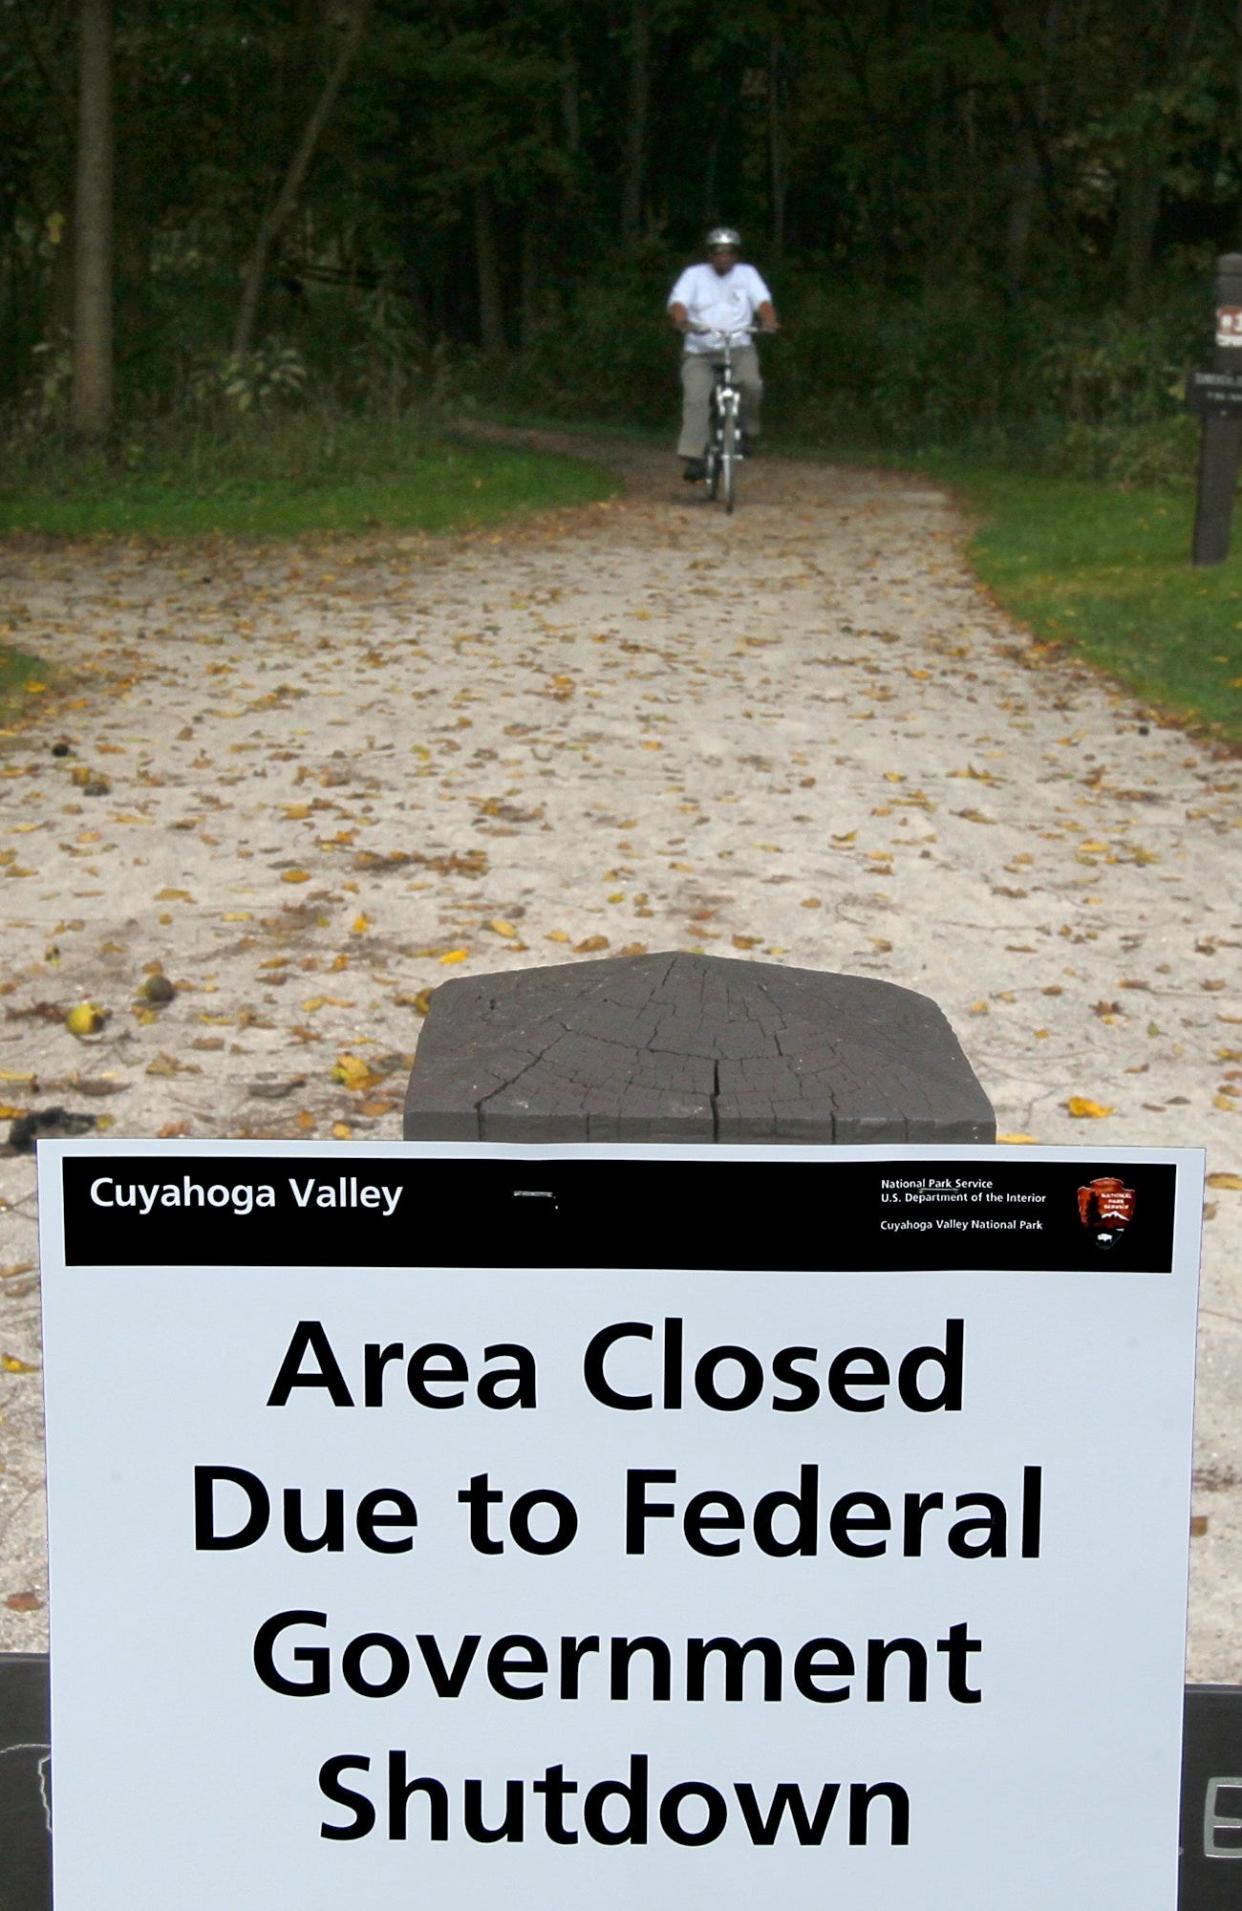 A sign posted in October 2013 at the Botzum Trailhead of the Cuyahoga Valley National Park alerts visitors to the area's closure due to a government shutdown. Ten years later, the threat of another shutdown looms this weekend.